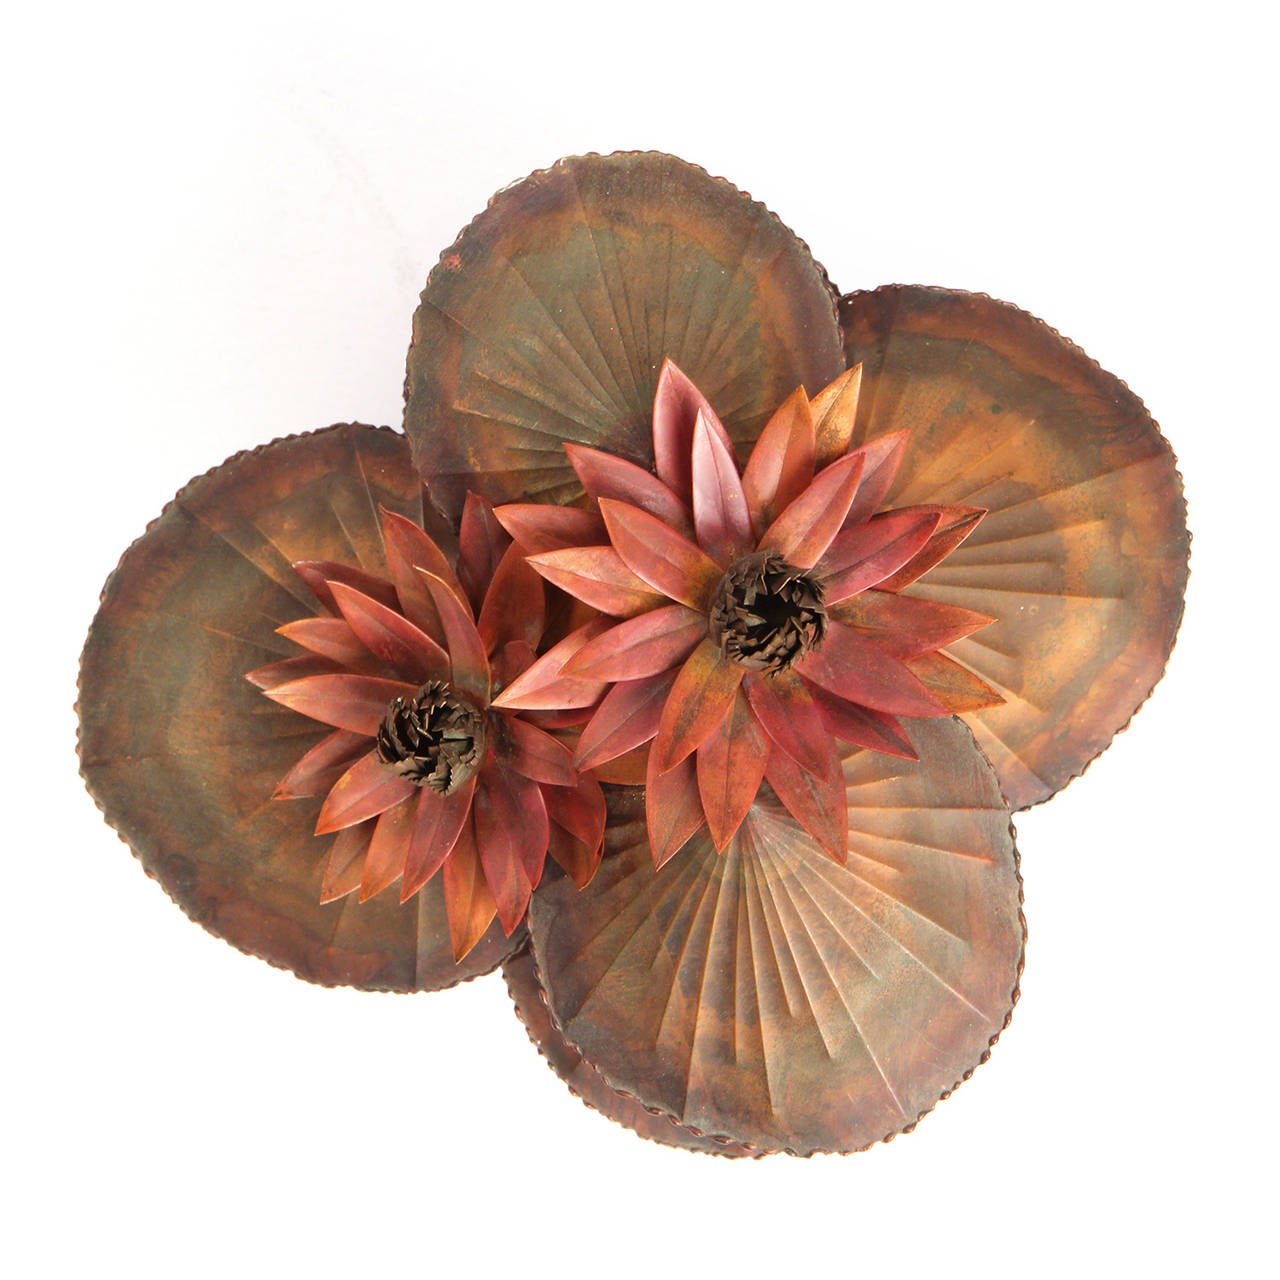 Metal Water Lilly Sculpture by Steck